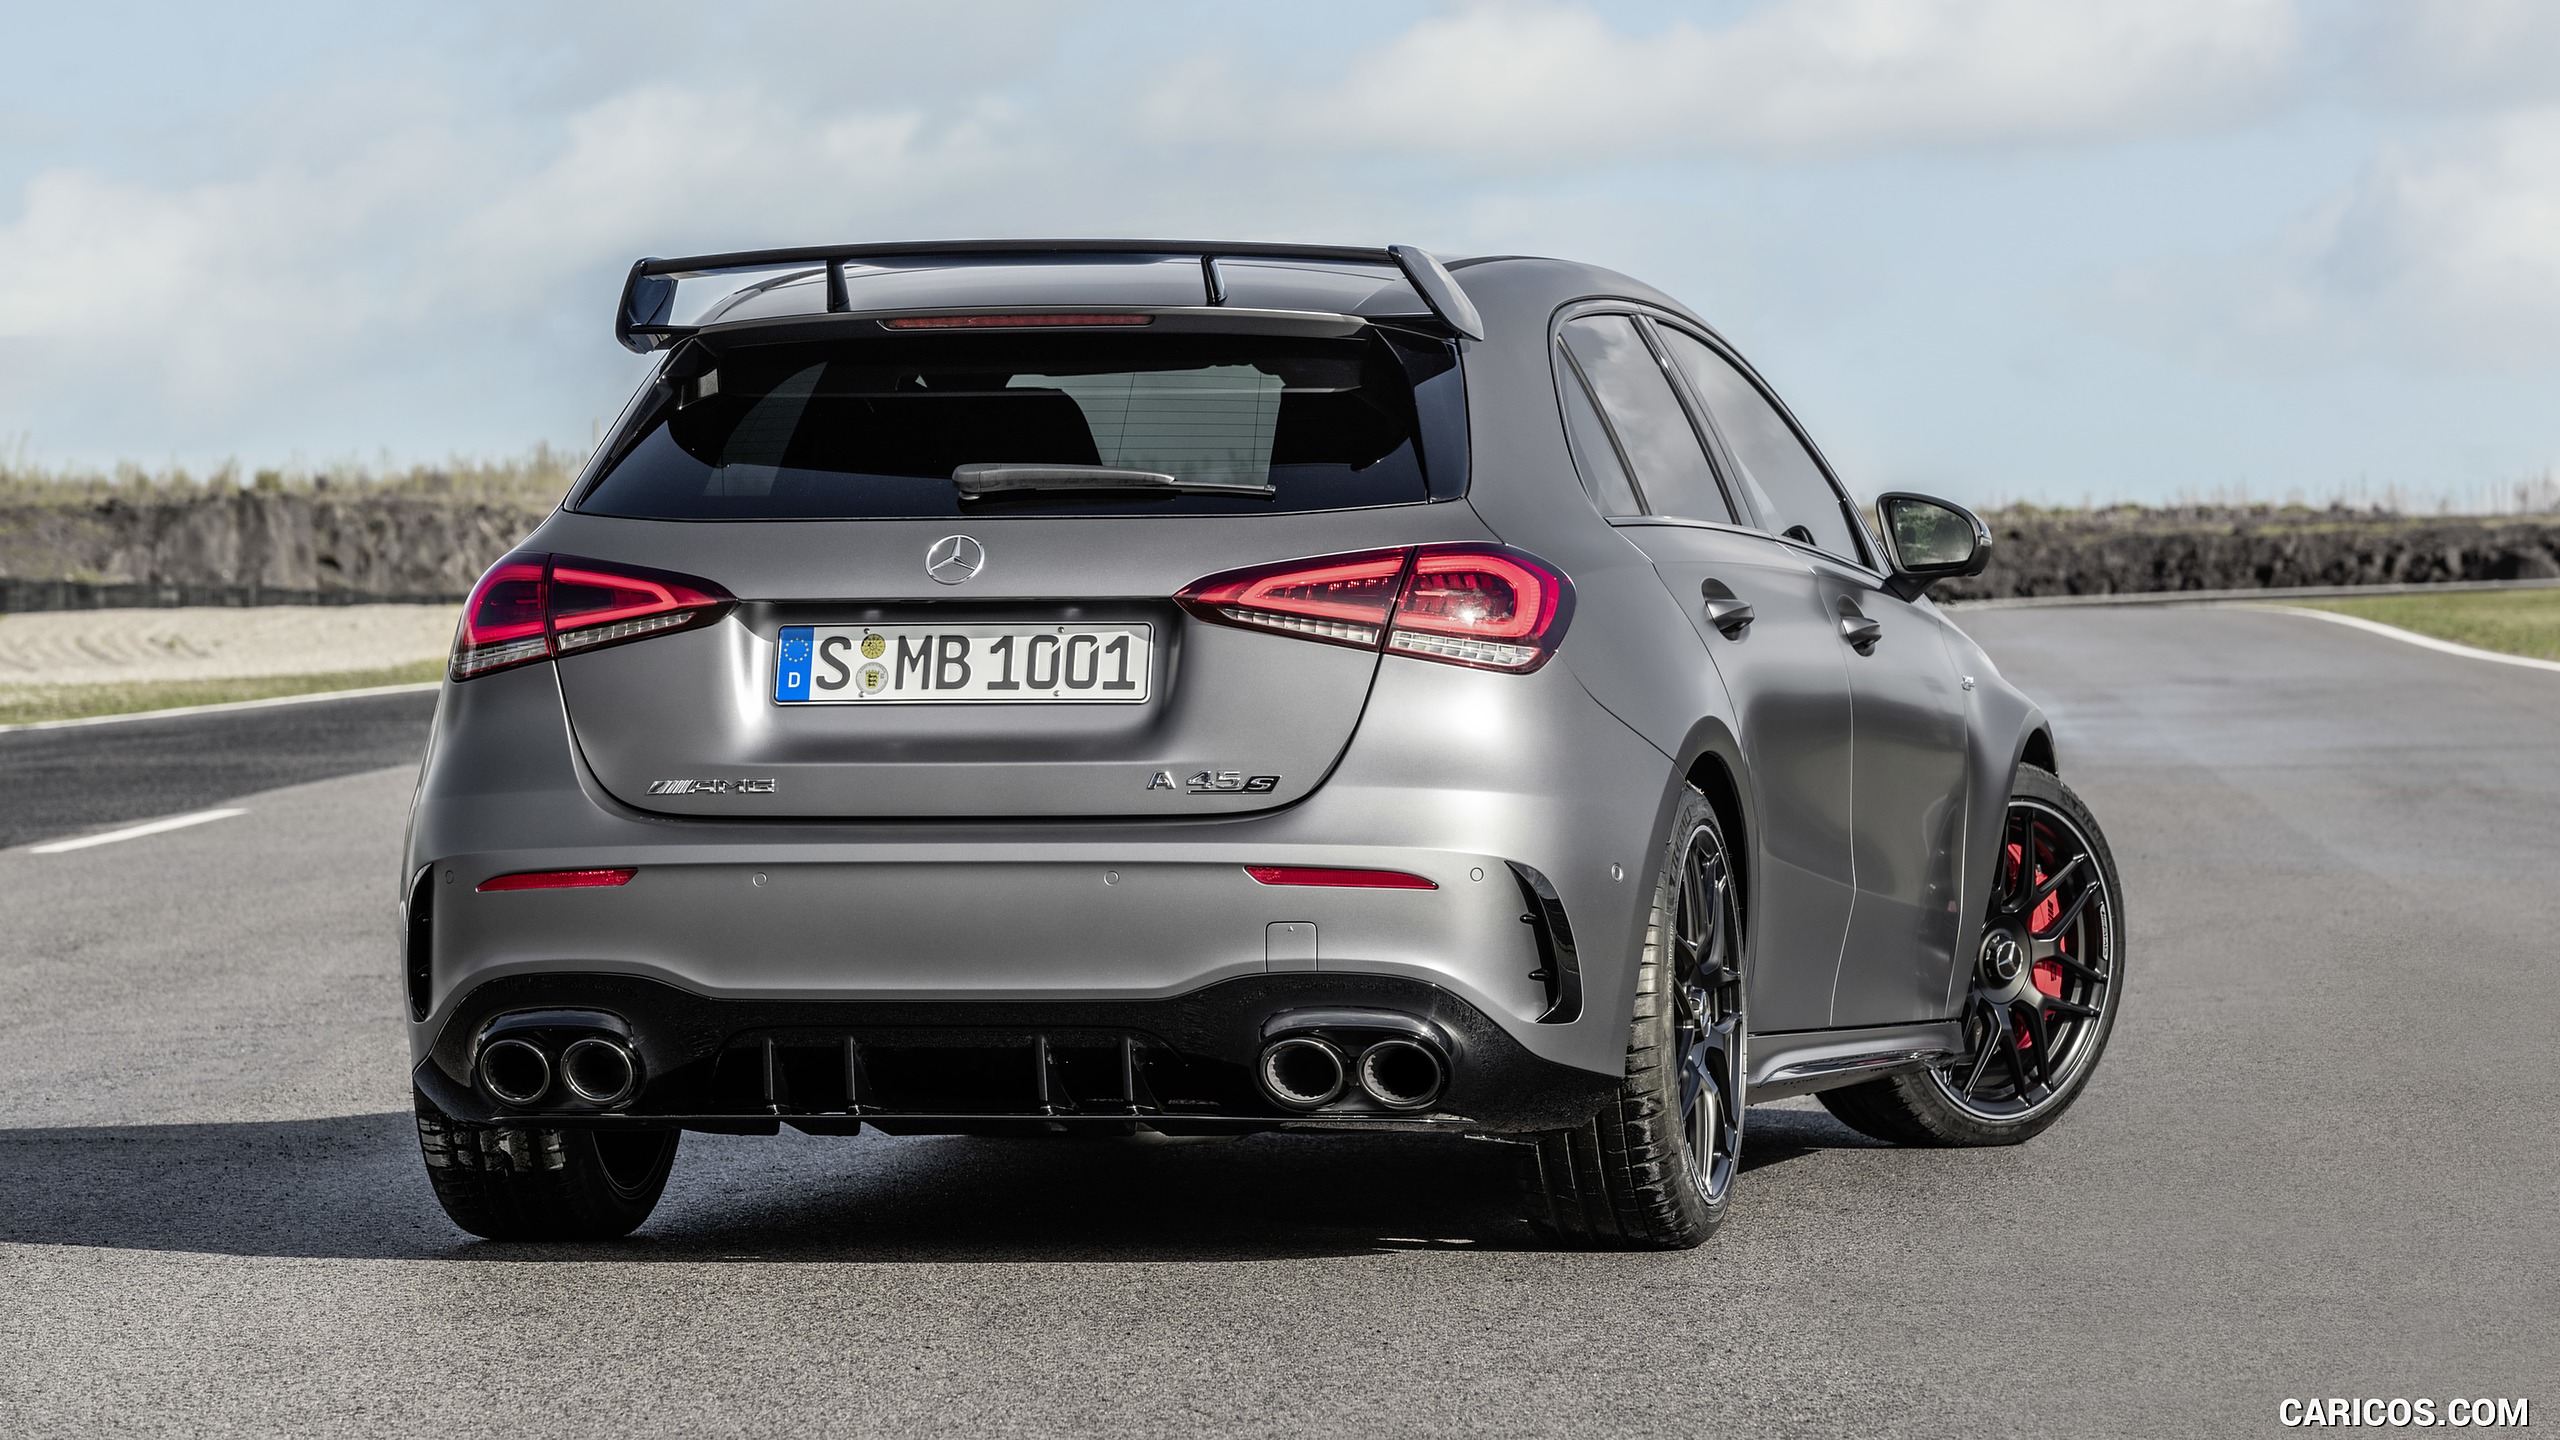 2020 Mercedes-AMG A 45 S 4MATIC+ - Rear, #24 of 188